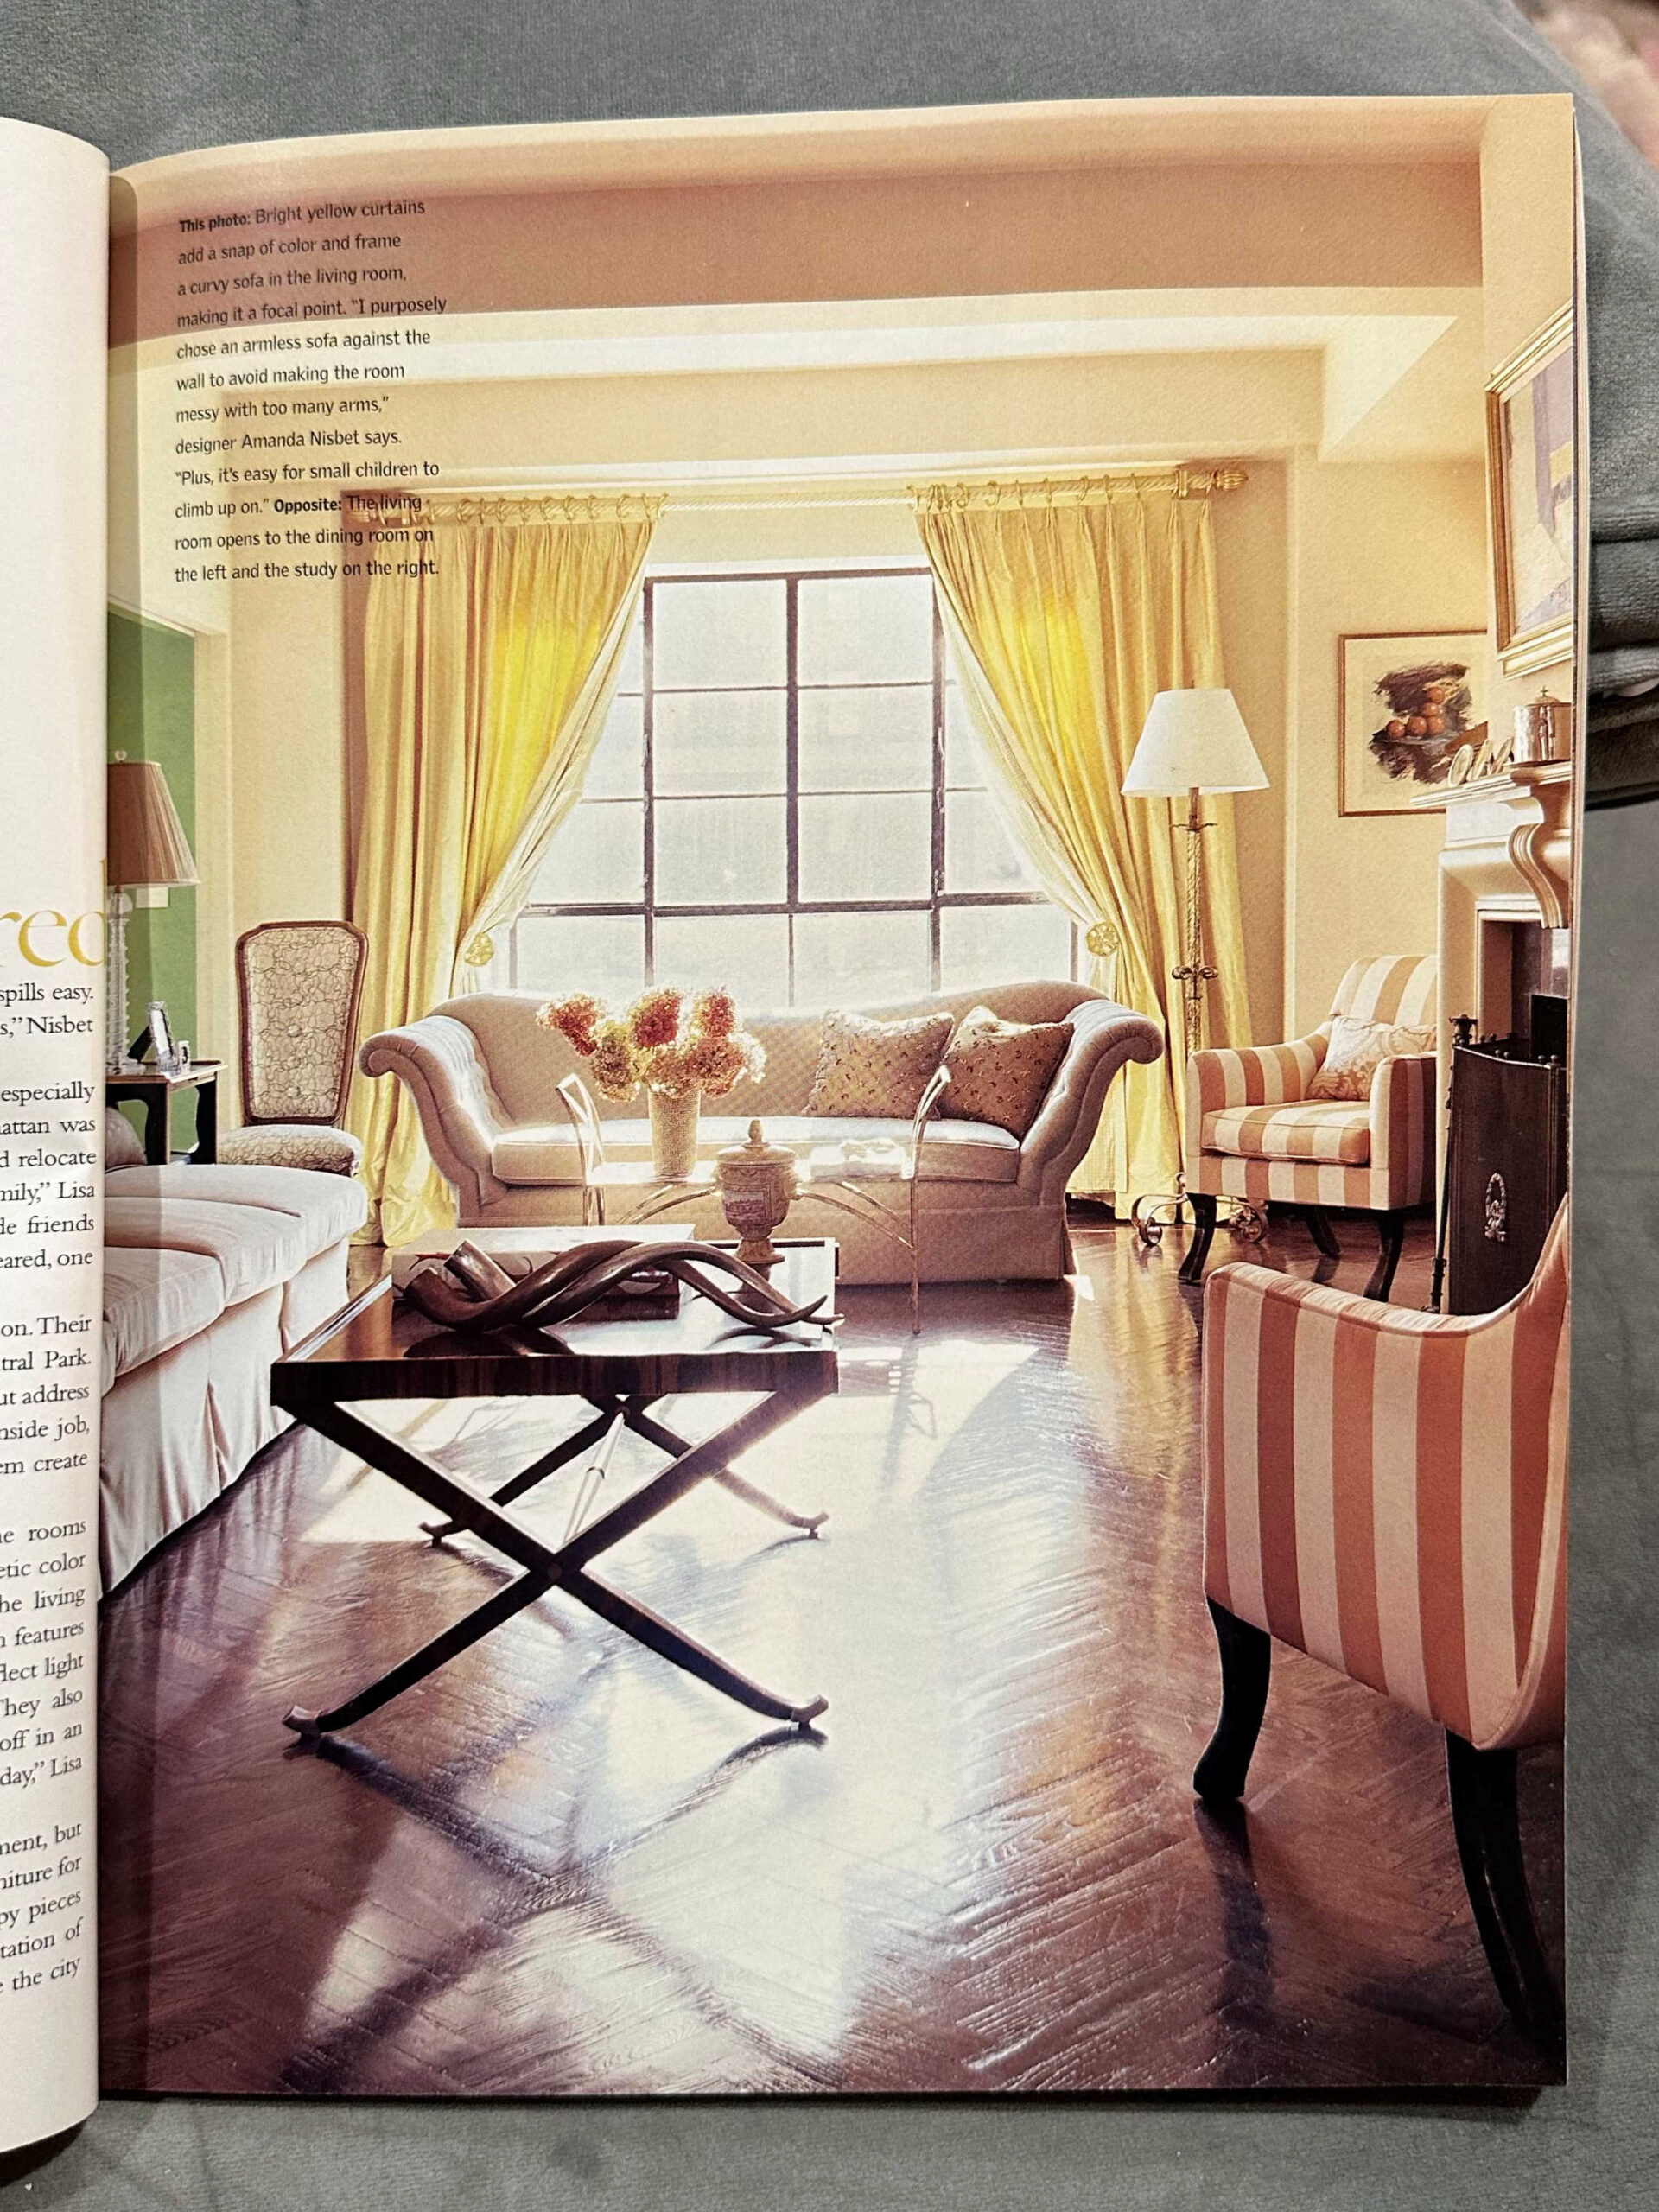 Living room with yellow curtains, neutral walls, orange and white striped chairs, white sofa, dark wood floors